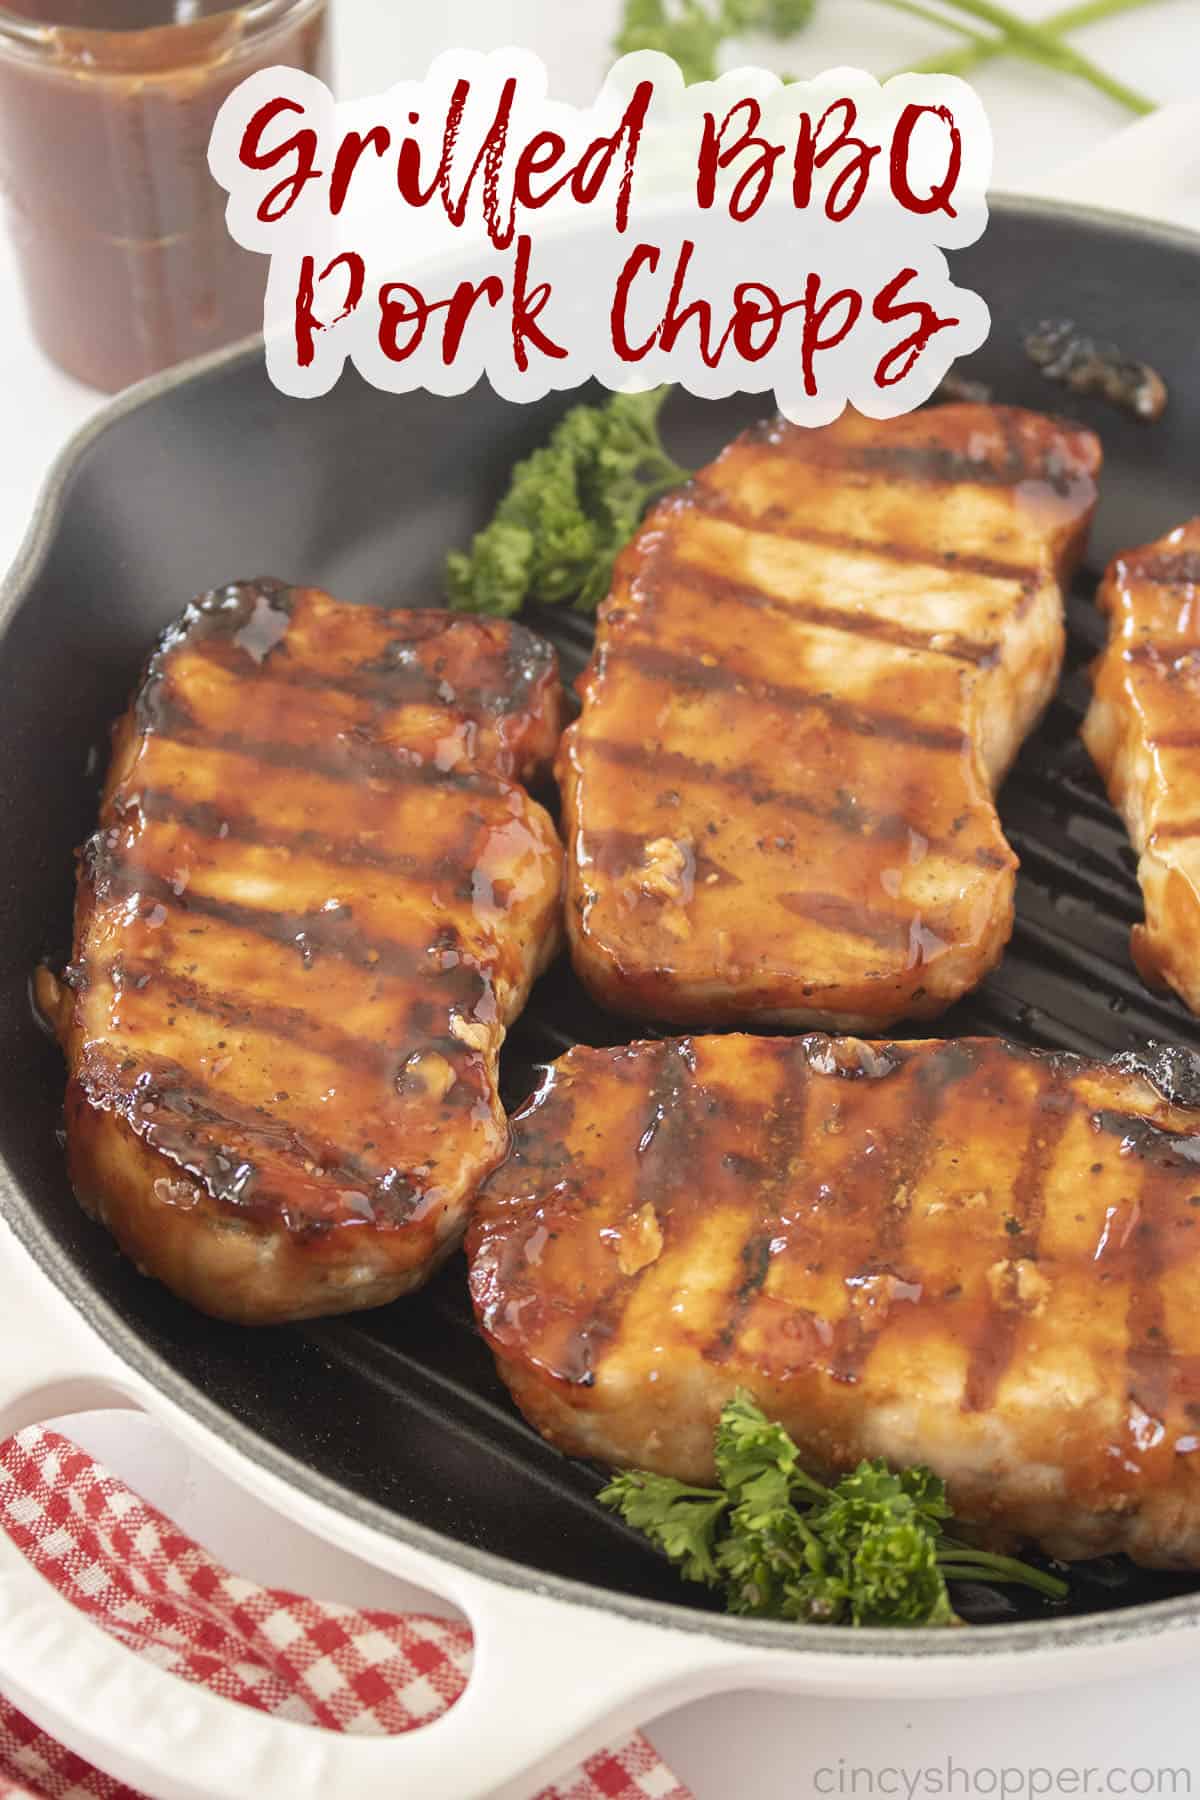 Text on image Grilled BBQ Pork Chops.